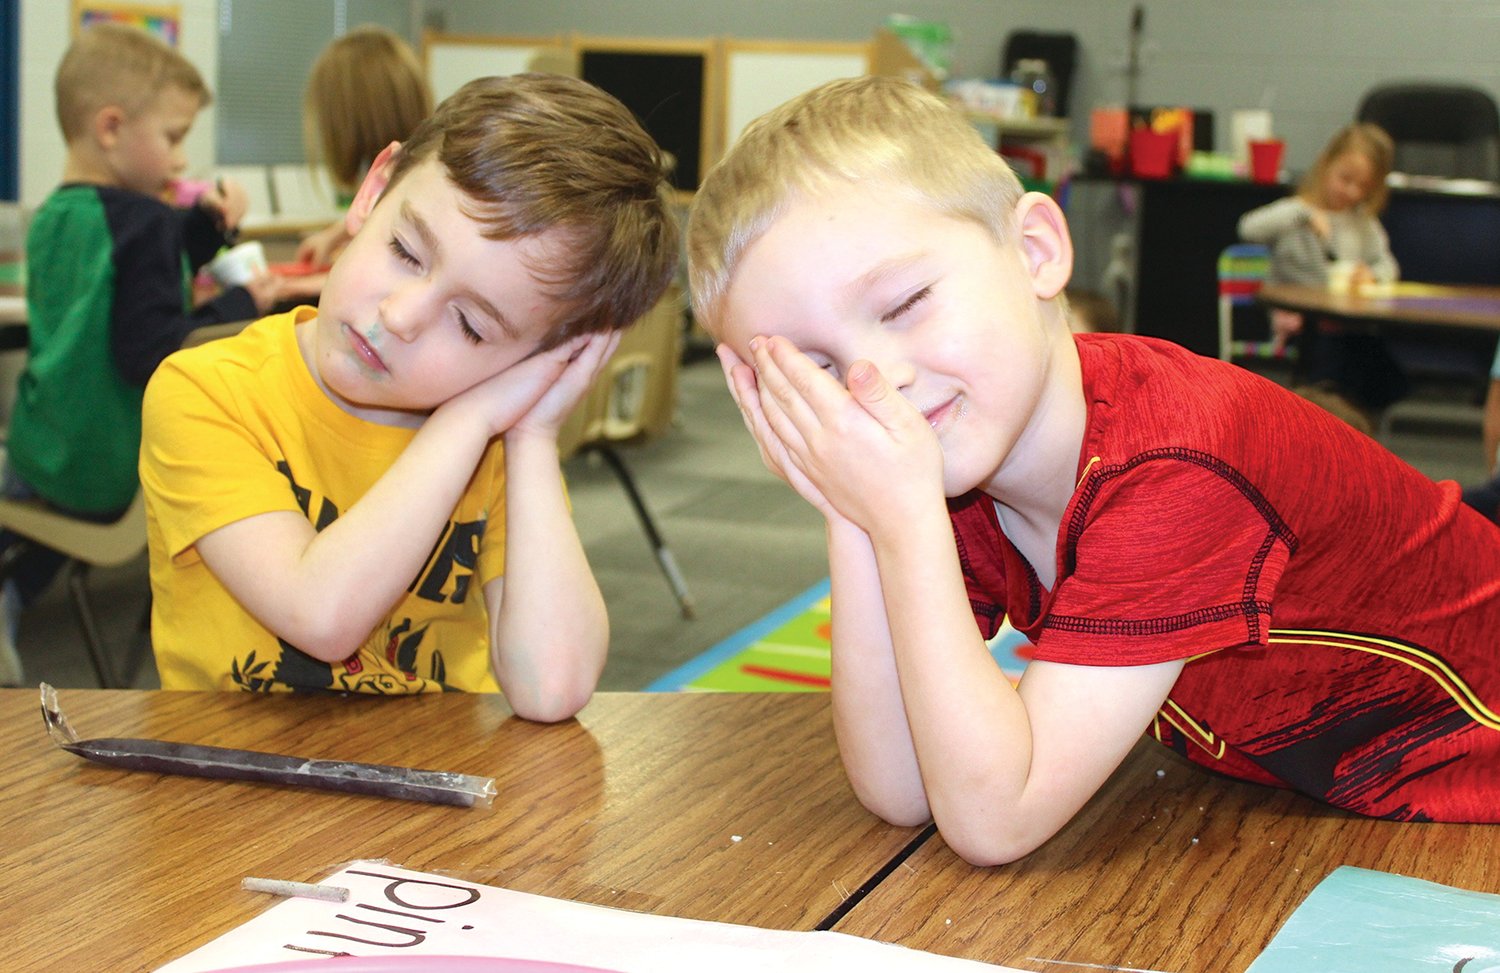 Franklin Skelton, left, and Colton Watson use their imaginations during play time Wednesday at Little Mountie Preschool.